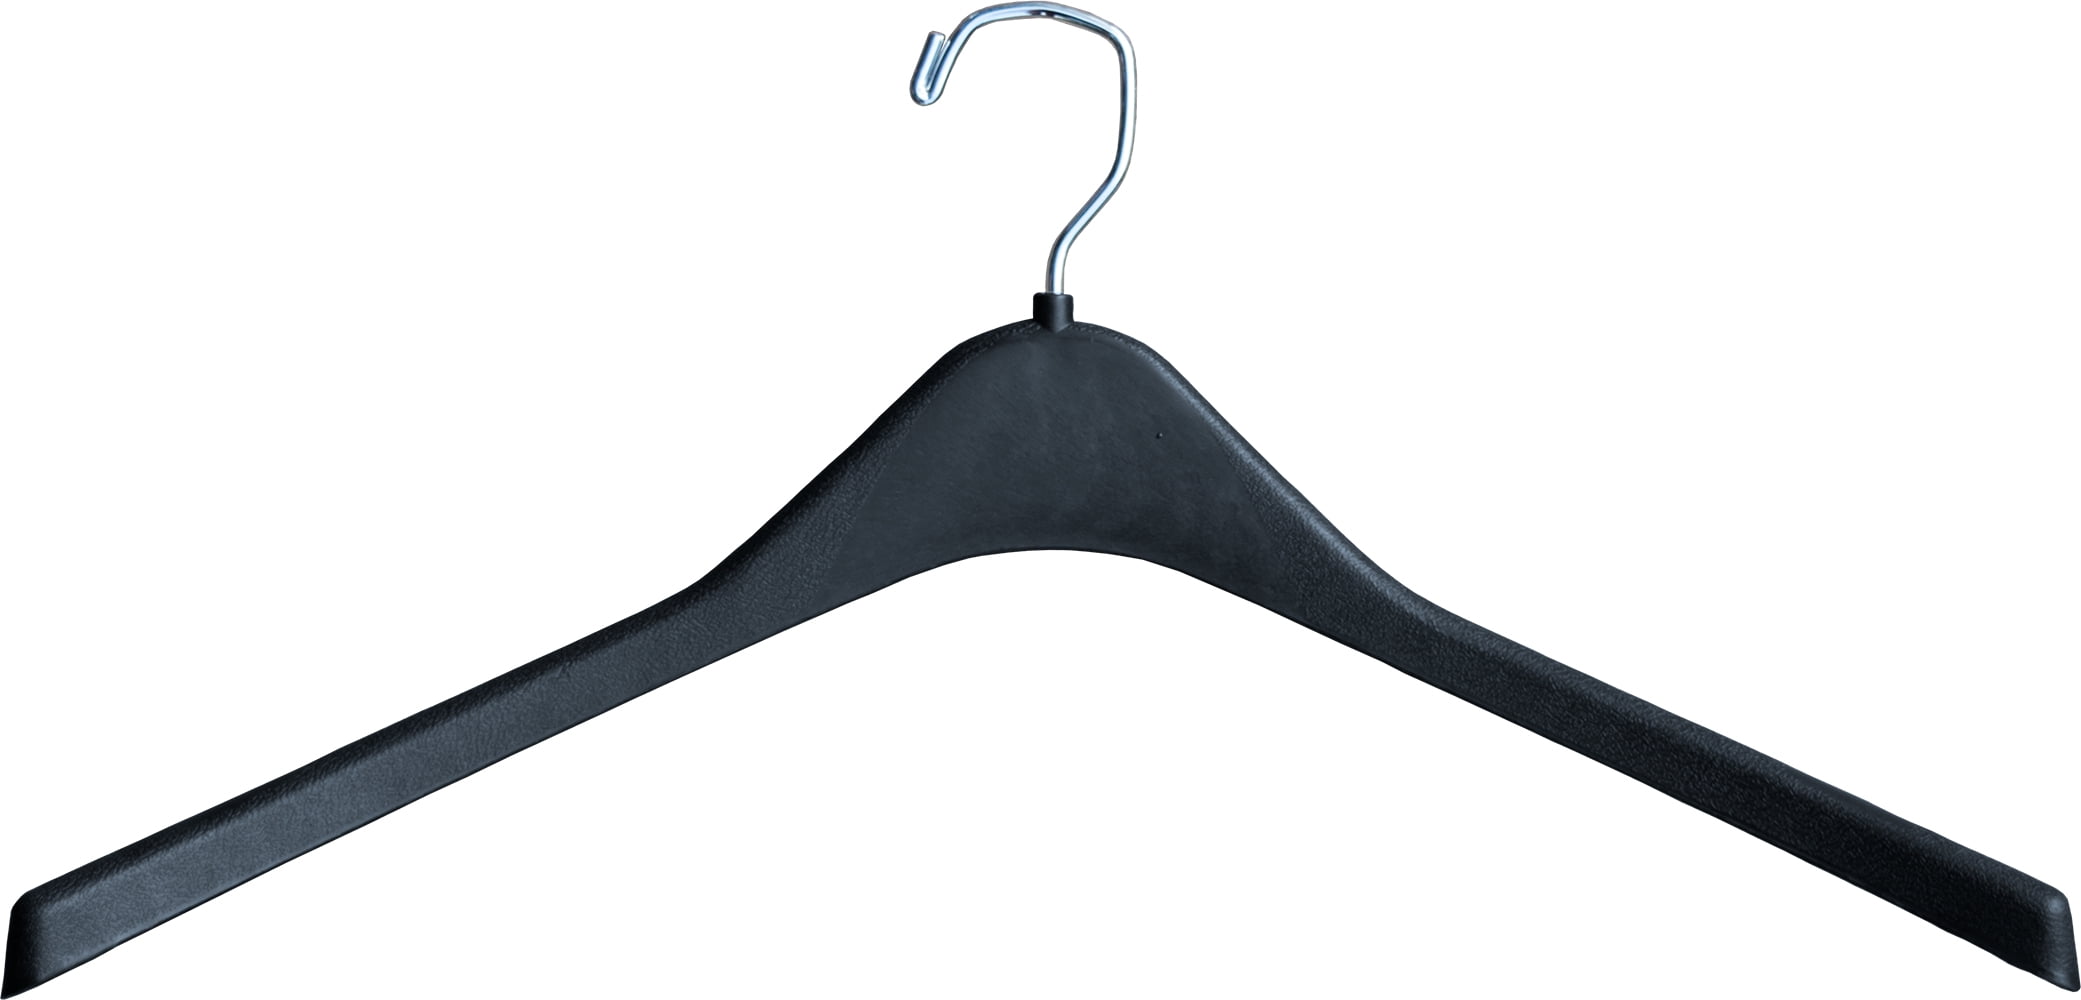 The Hanger Store™ Strong Heavy Duty Plastic Adult Coat Hangers with Trouser Bar 